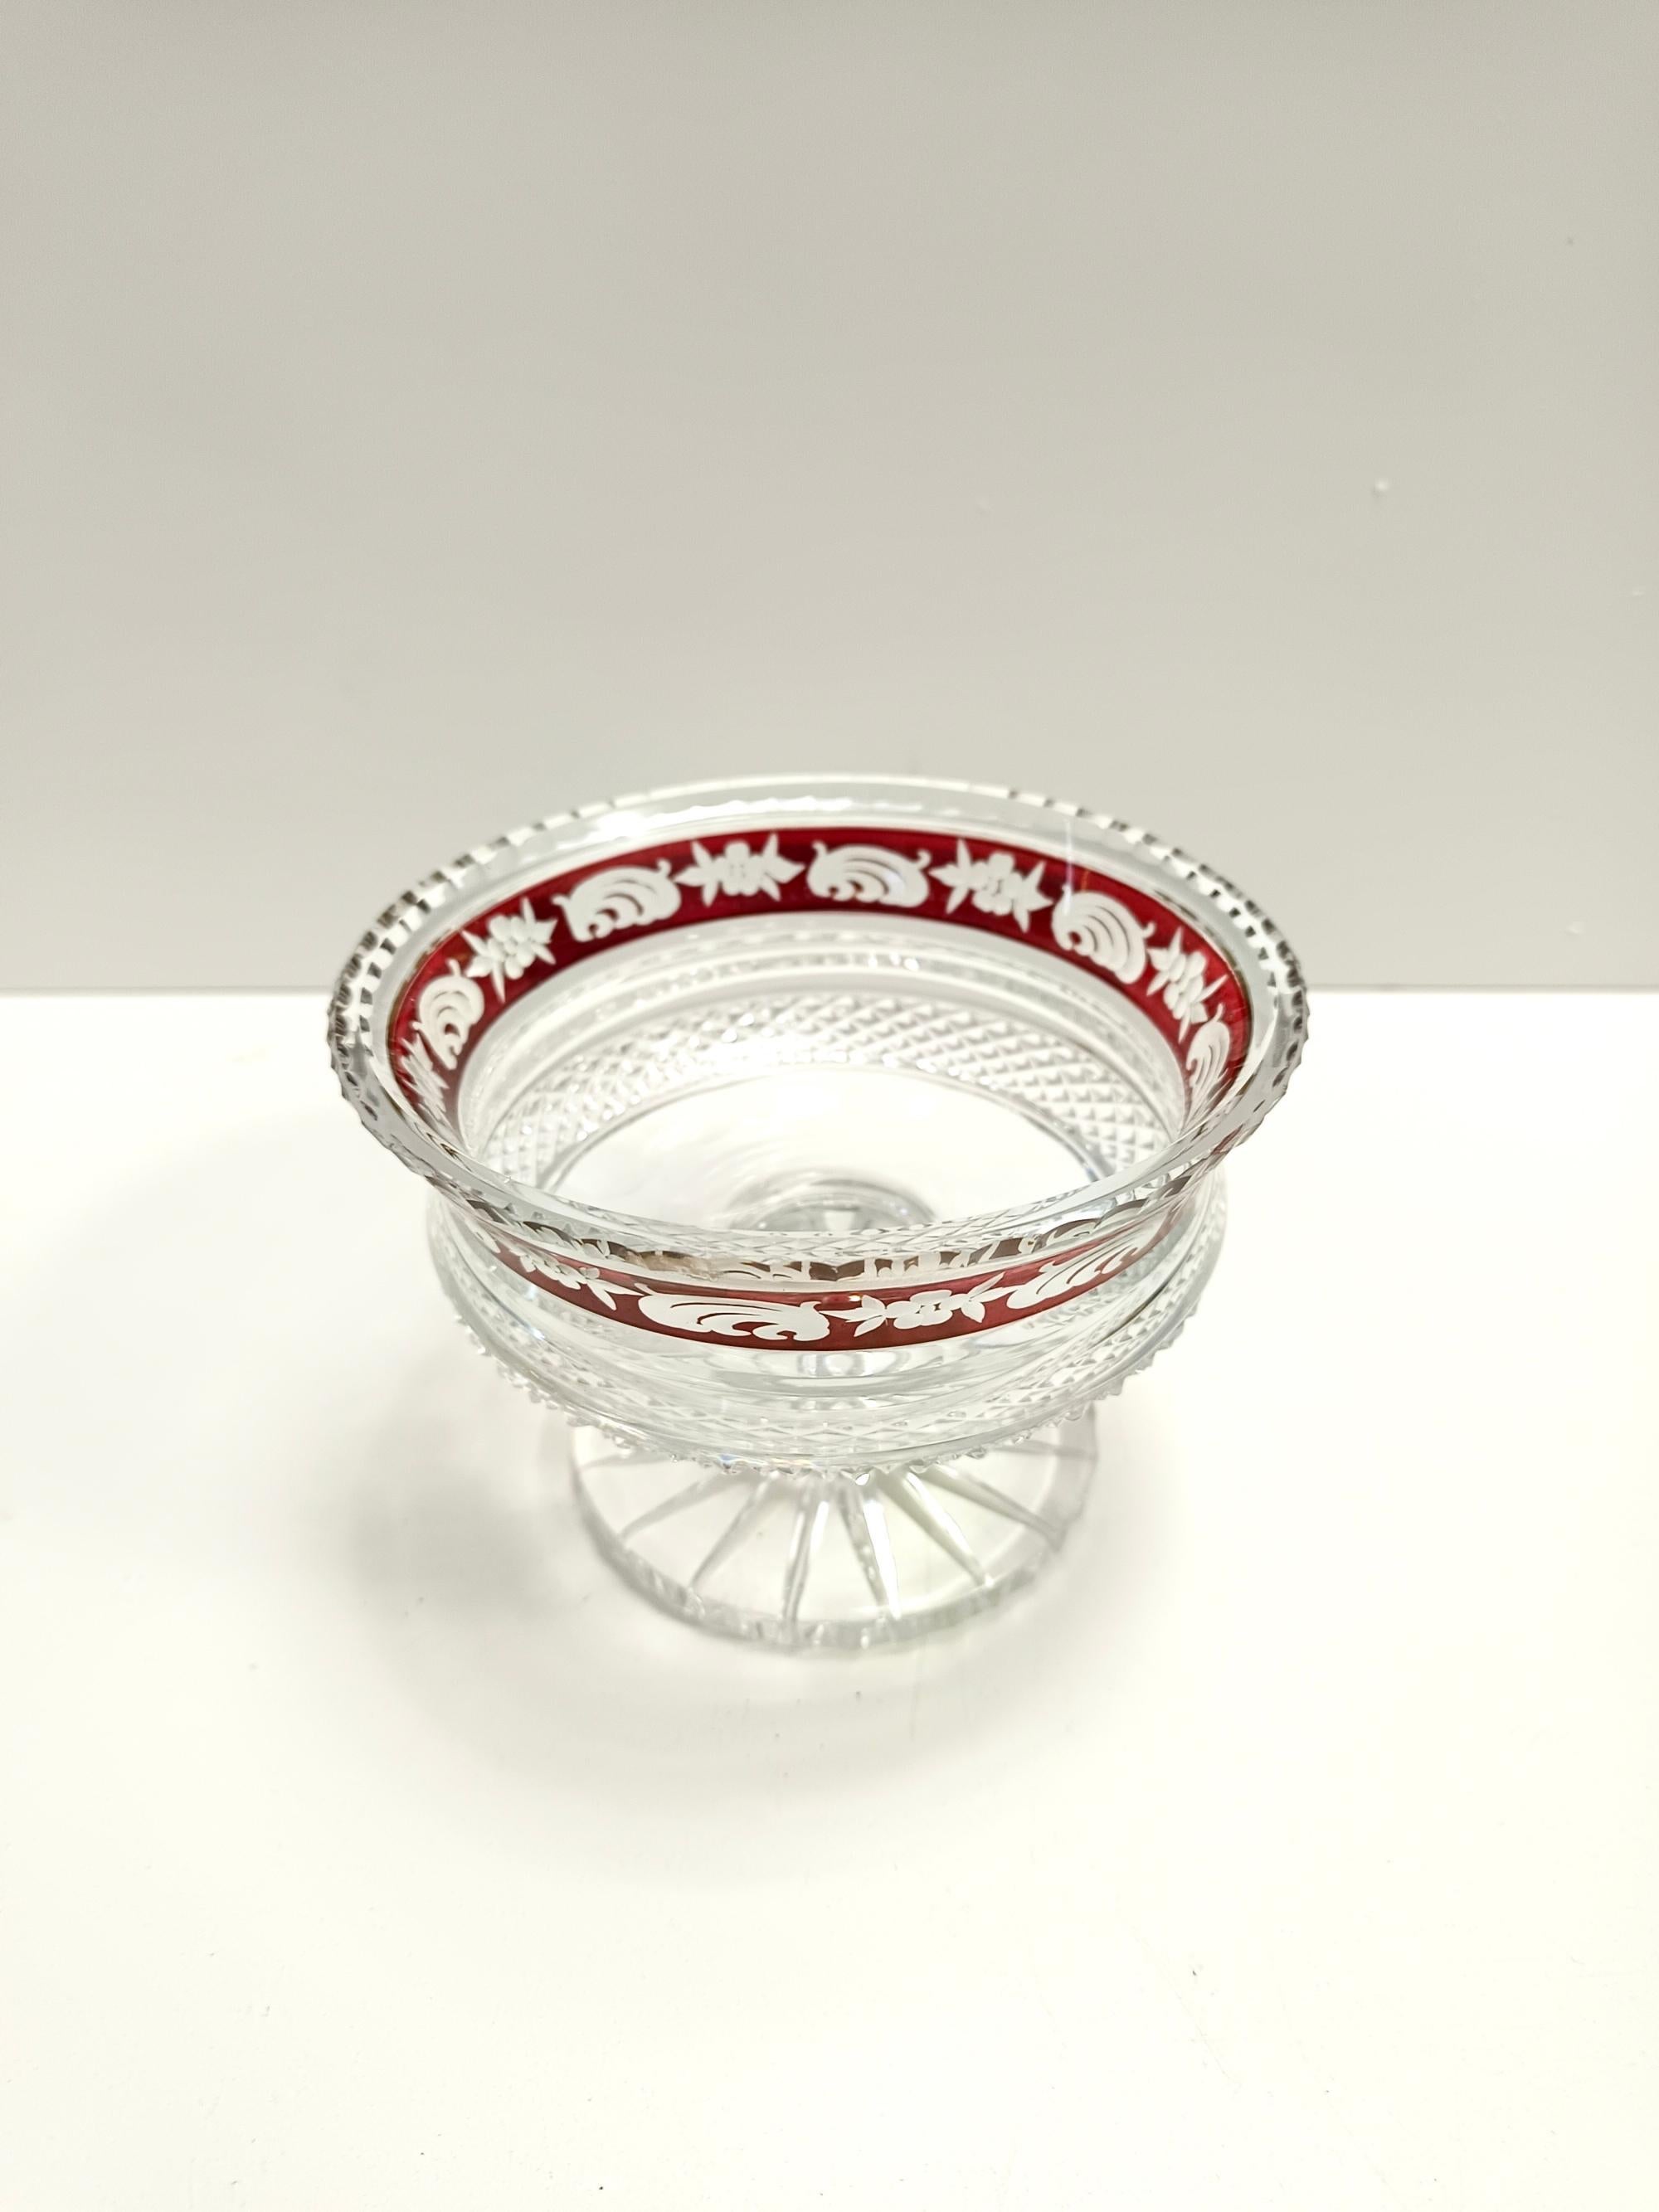 Mid-20th Century Transparent and Red Crystal Vide-Pouch / Centerpiece, Czech Republic For Sale